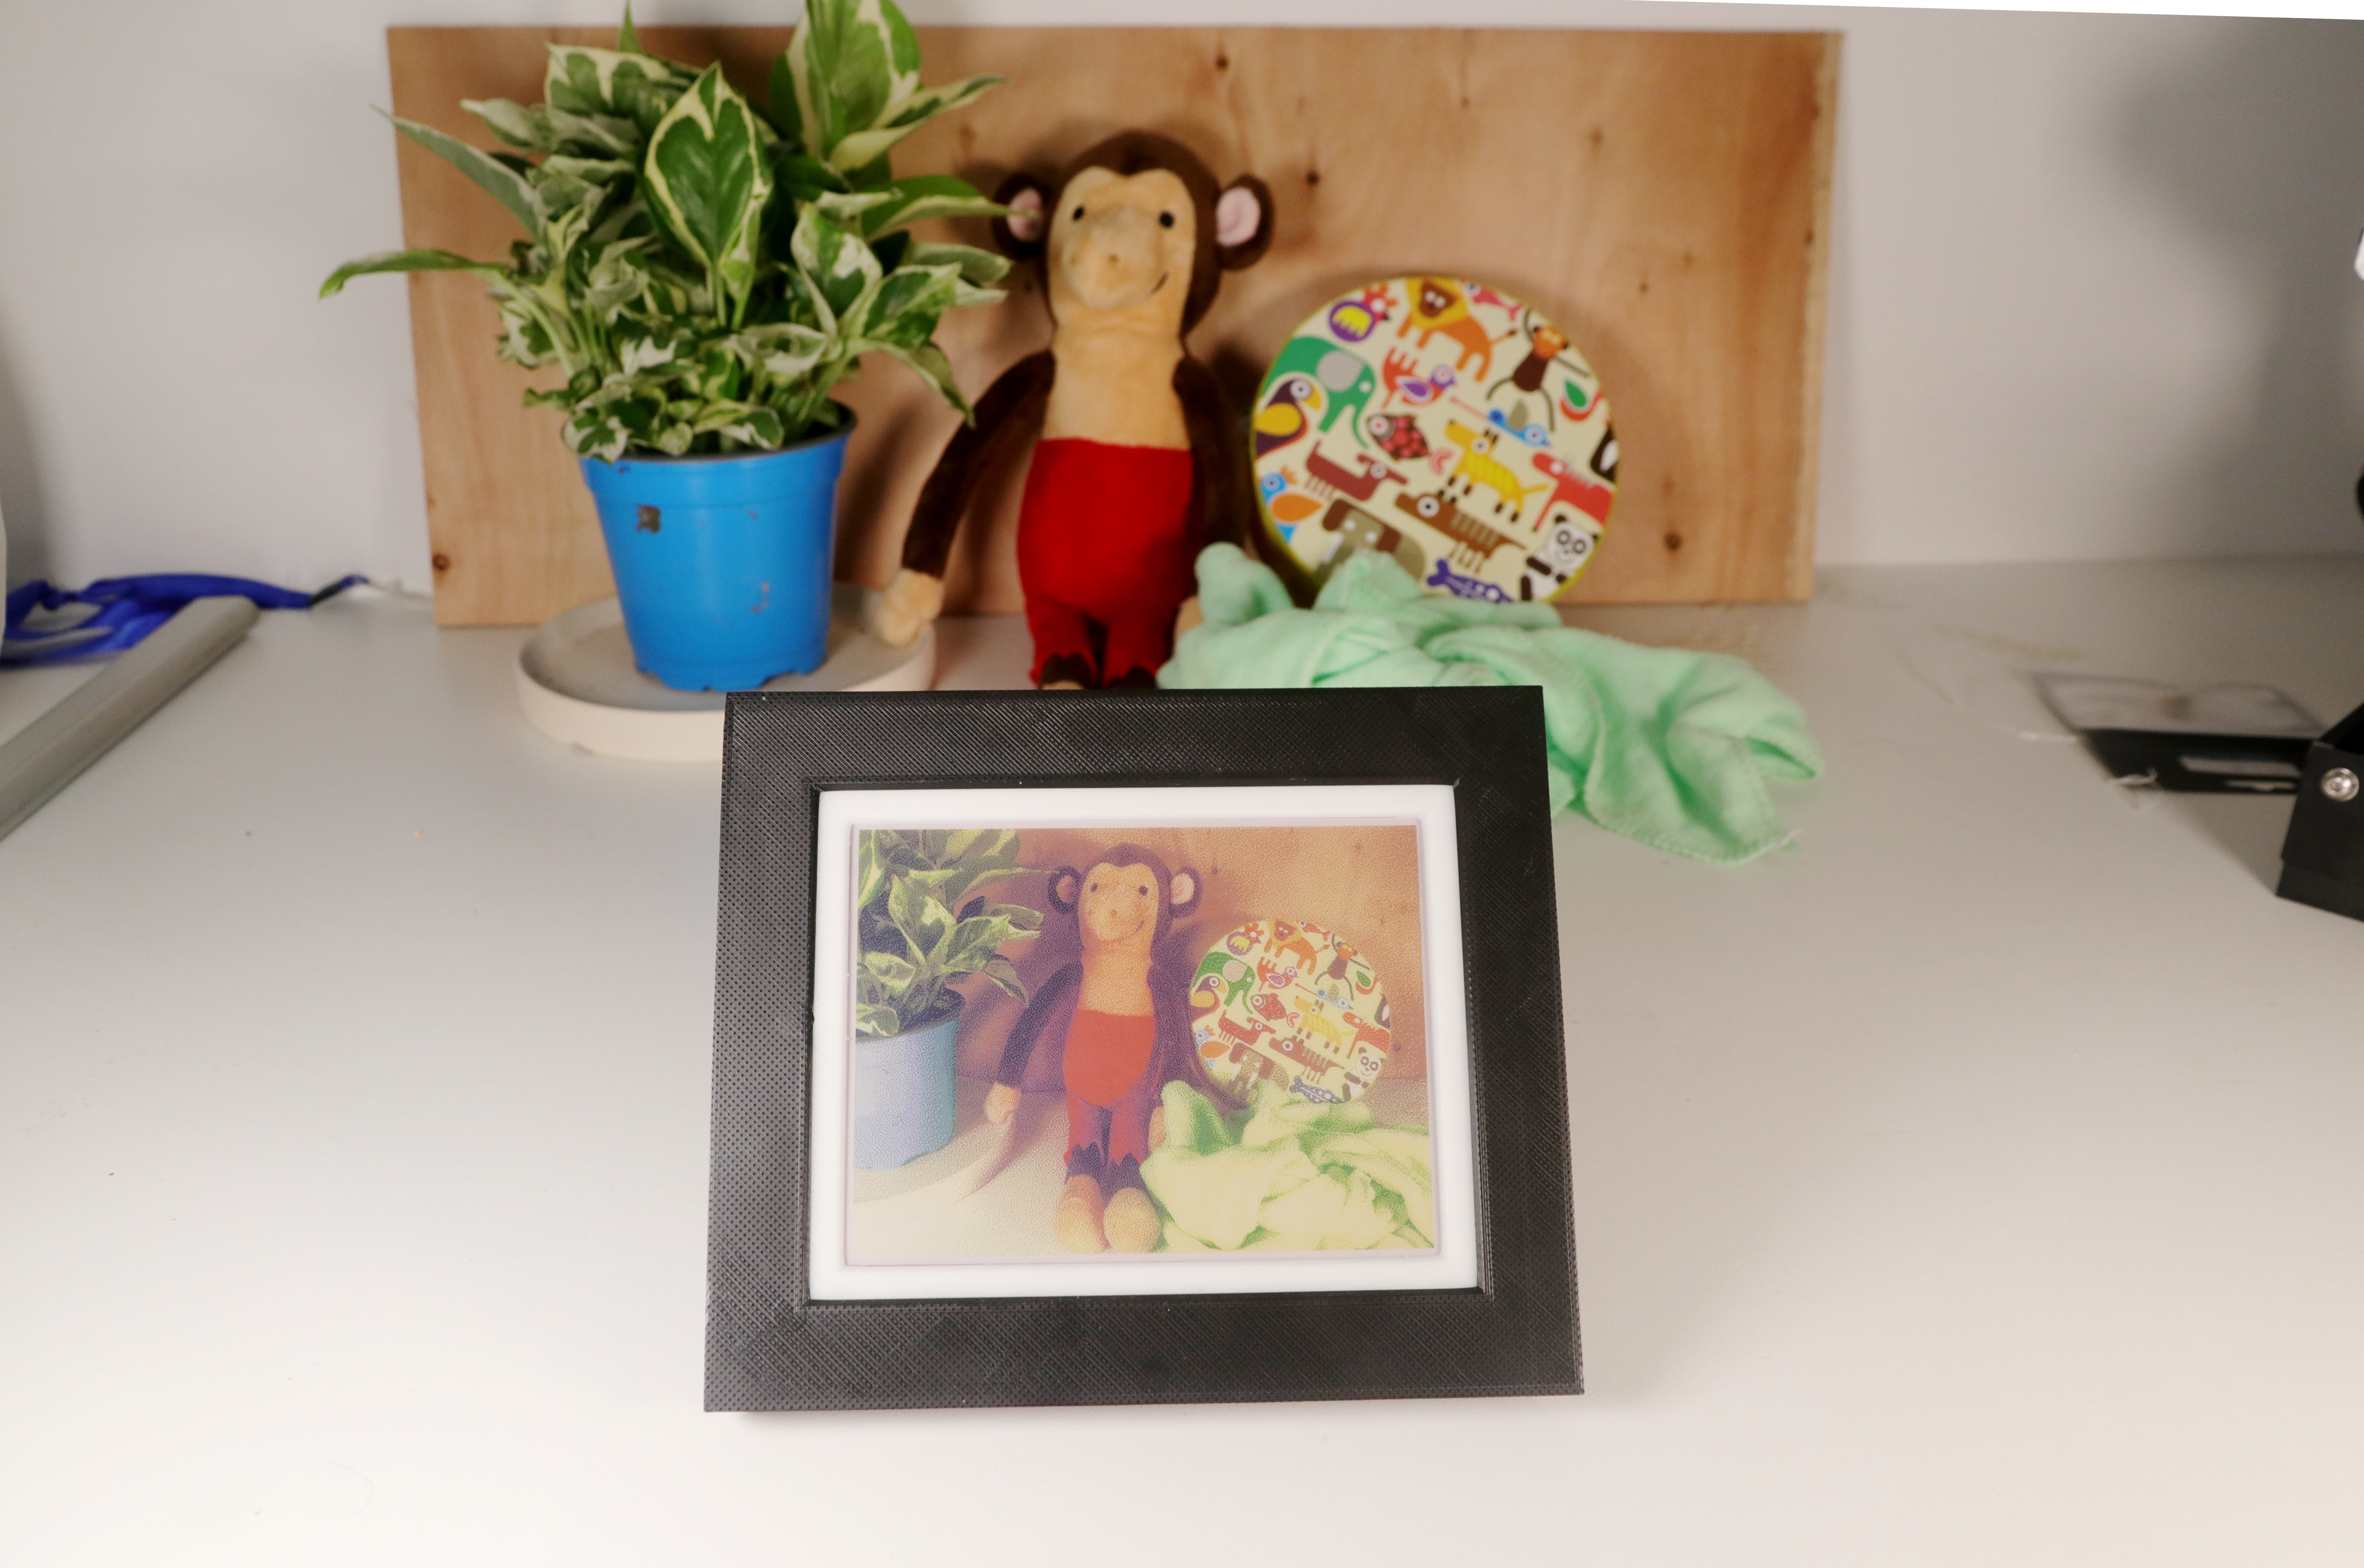 A Color E-Ink Wi-Fi Picture Frame